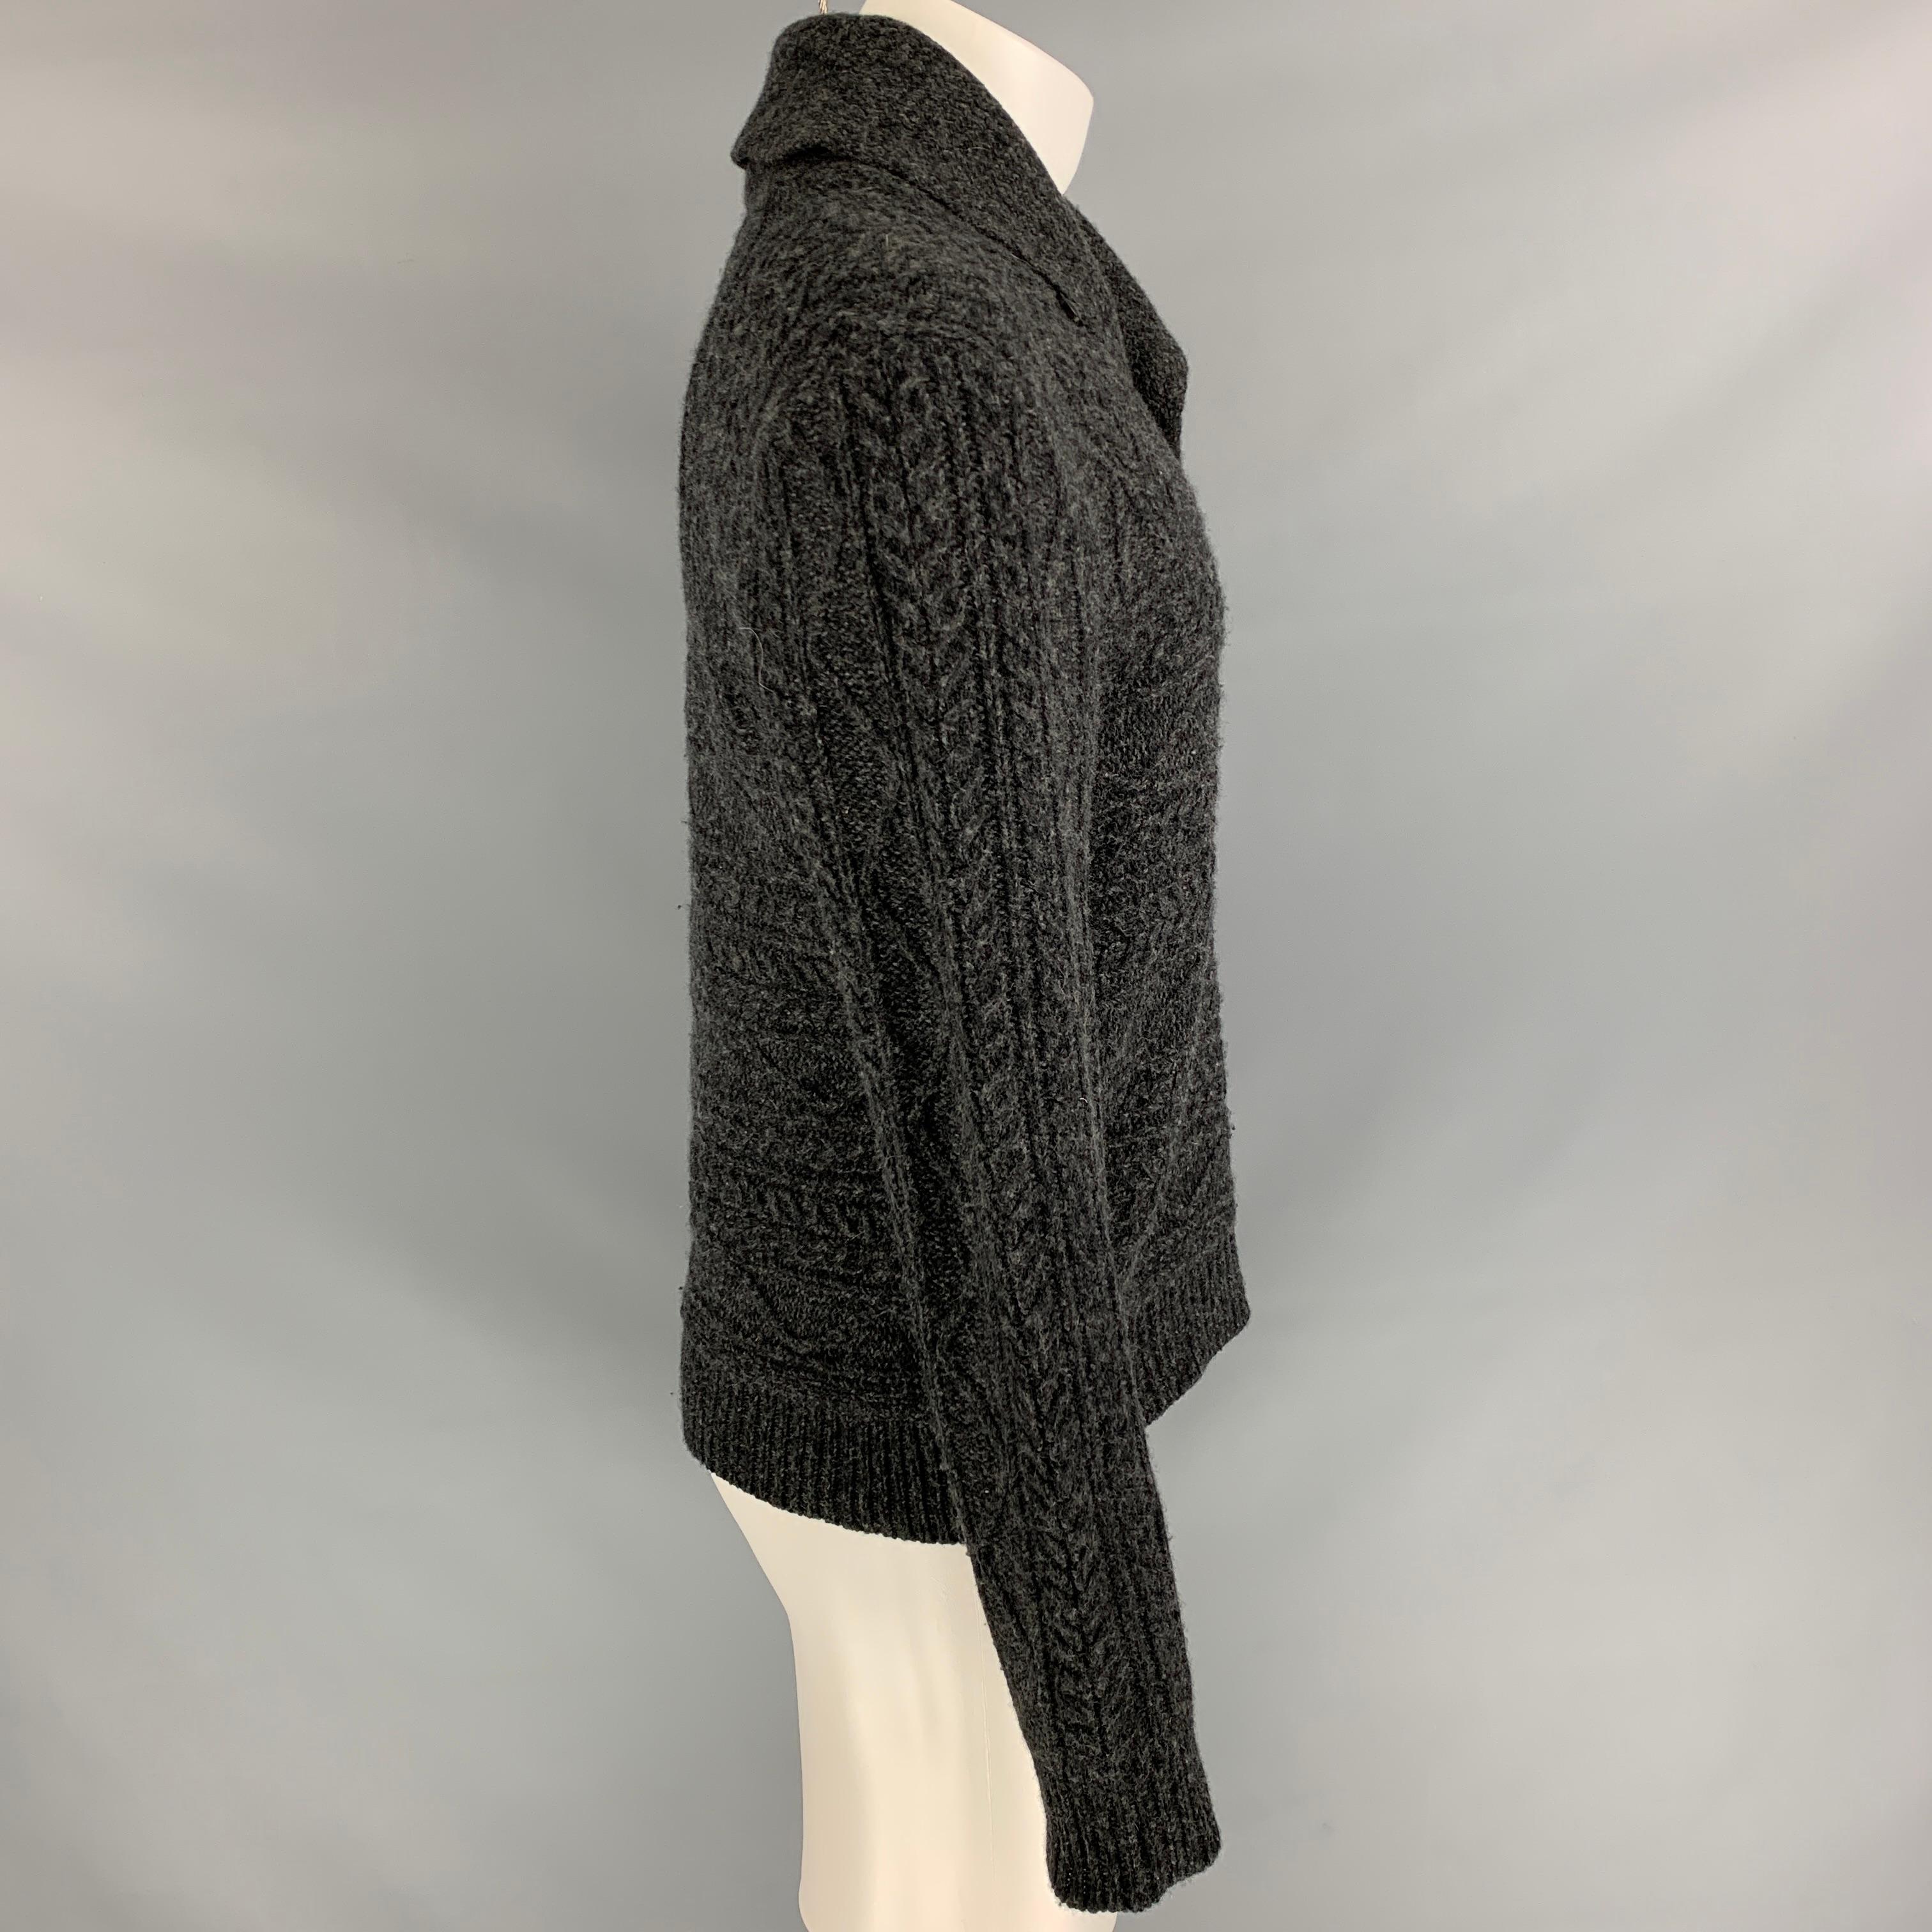 RRL by RALPH LAUREN sweater comes in a charcoal knitted wool featuring a shawl collar and long sleeves. 

Very Good Pre-Owned Condition.
Marked: M

Measurements:

Shoulder: 20 in.
Chest: 40 in.
Sleeve: 26 in.
Length: 25 in. 